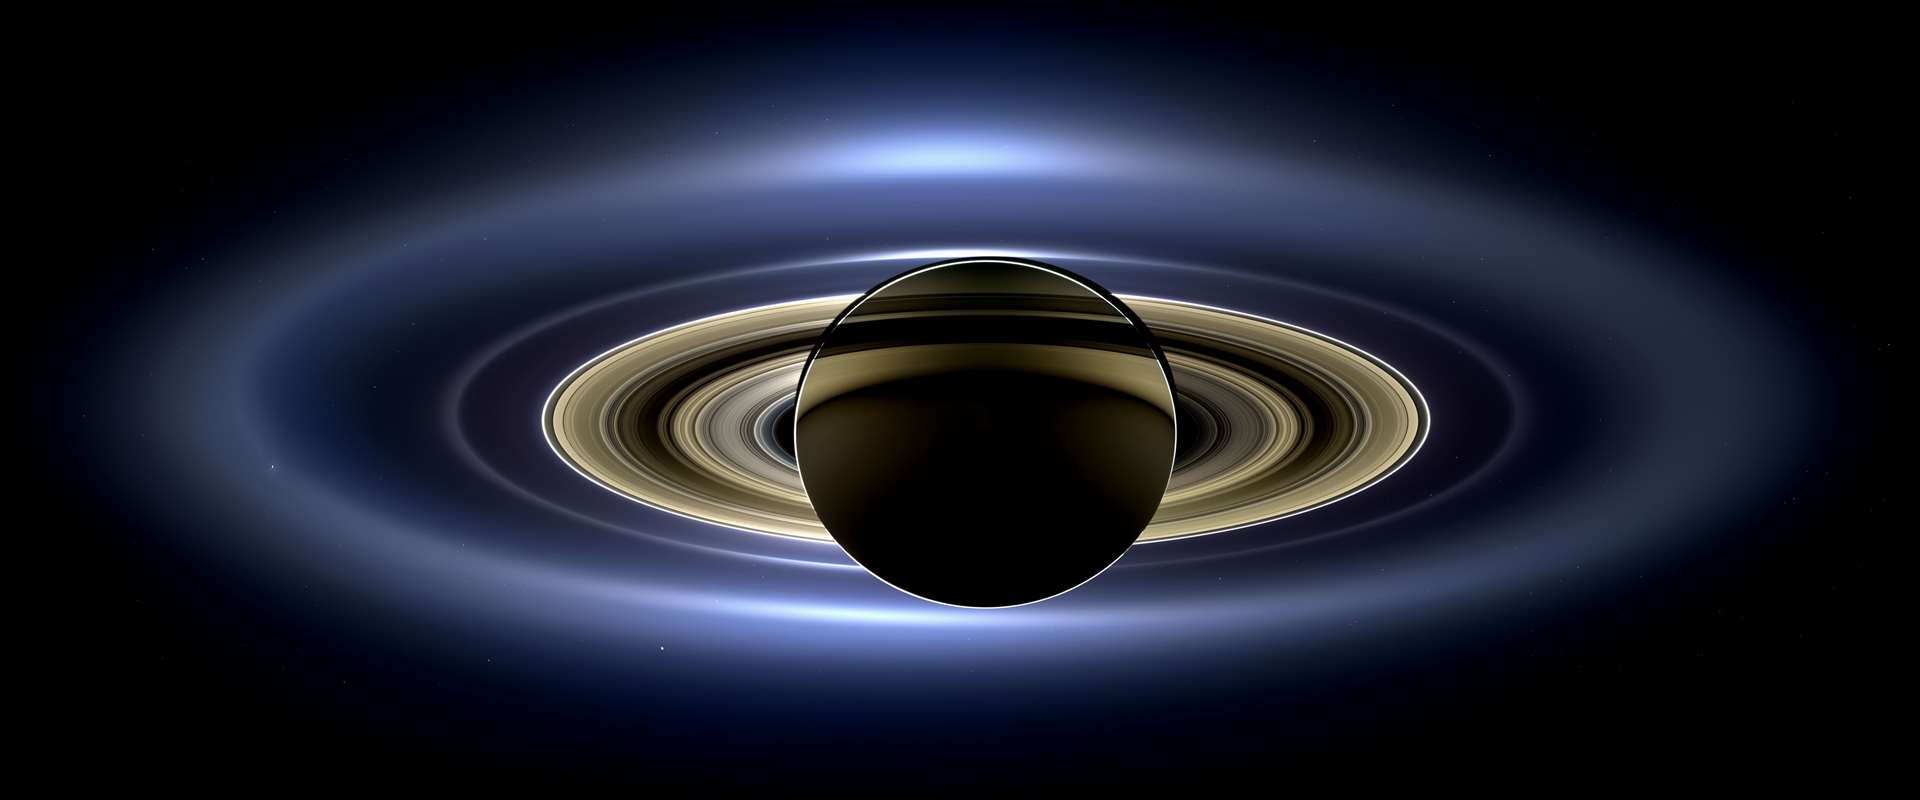 Saturn's beautiful rings are believed to have been formed by a moon that was ripped apart by the planet's gravity. Picture: NASA / JPL-Caltech / Space Science Institute, Public domain, via Wikimedia Commons.